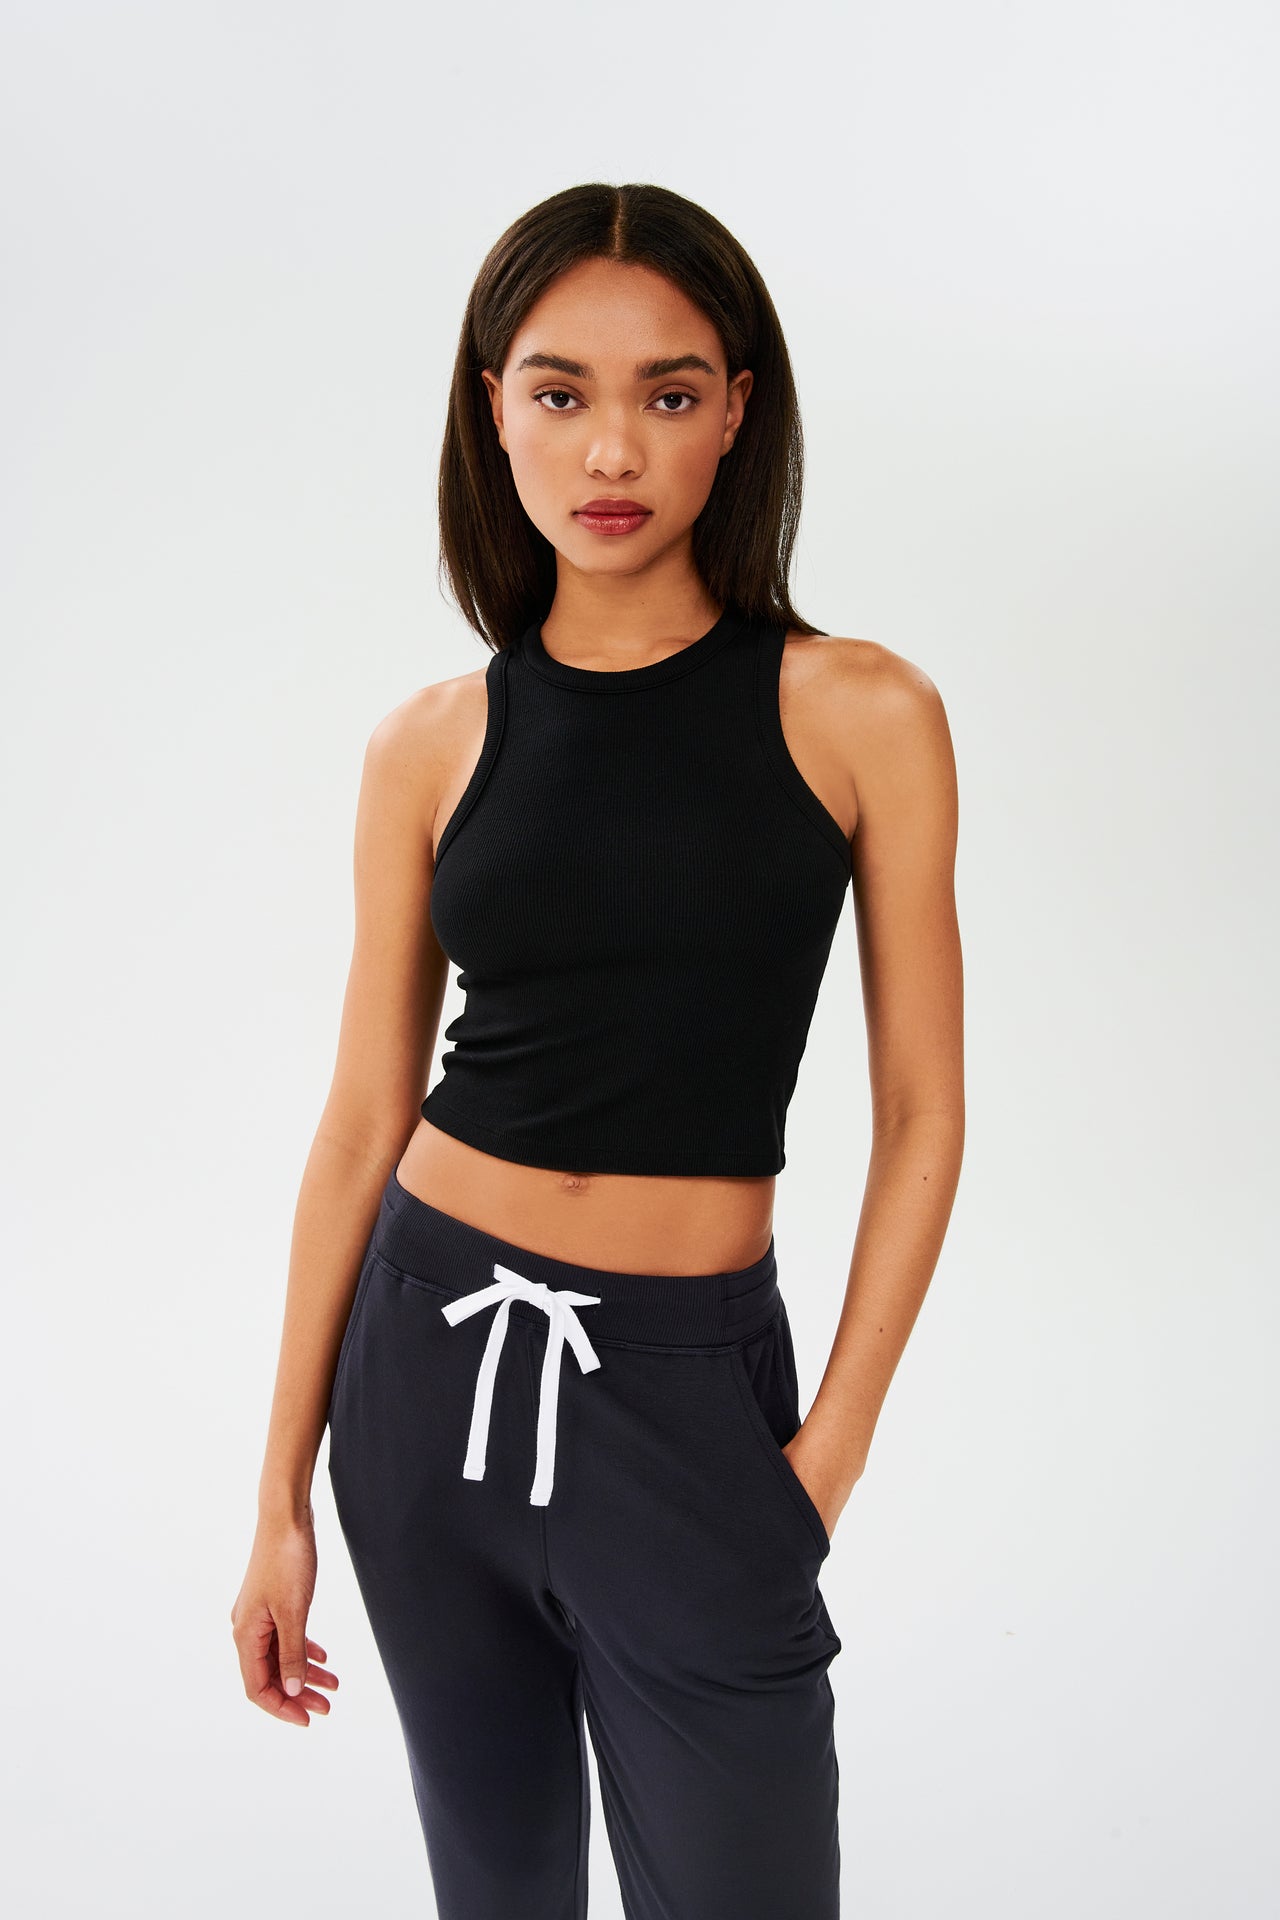 The model is wearing a black Kiki Rib Crop Tank from SPLITS59 and sweatpants made from soft fabric, perfect for gym workouts.